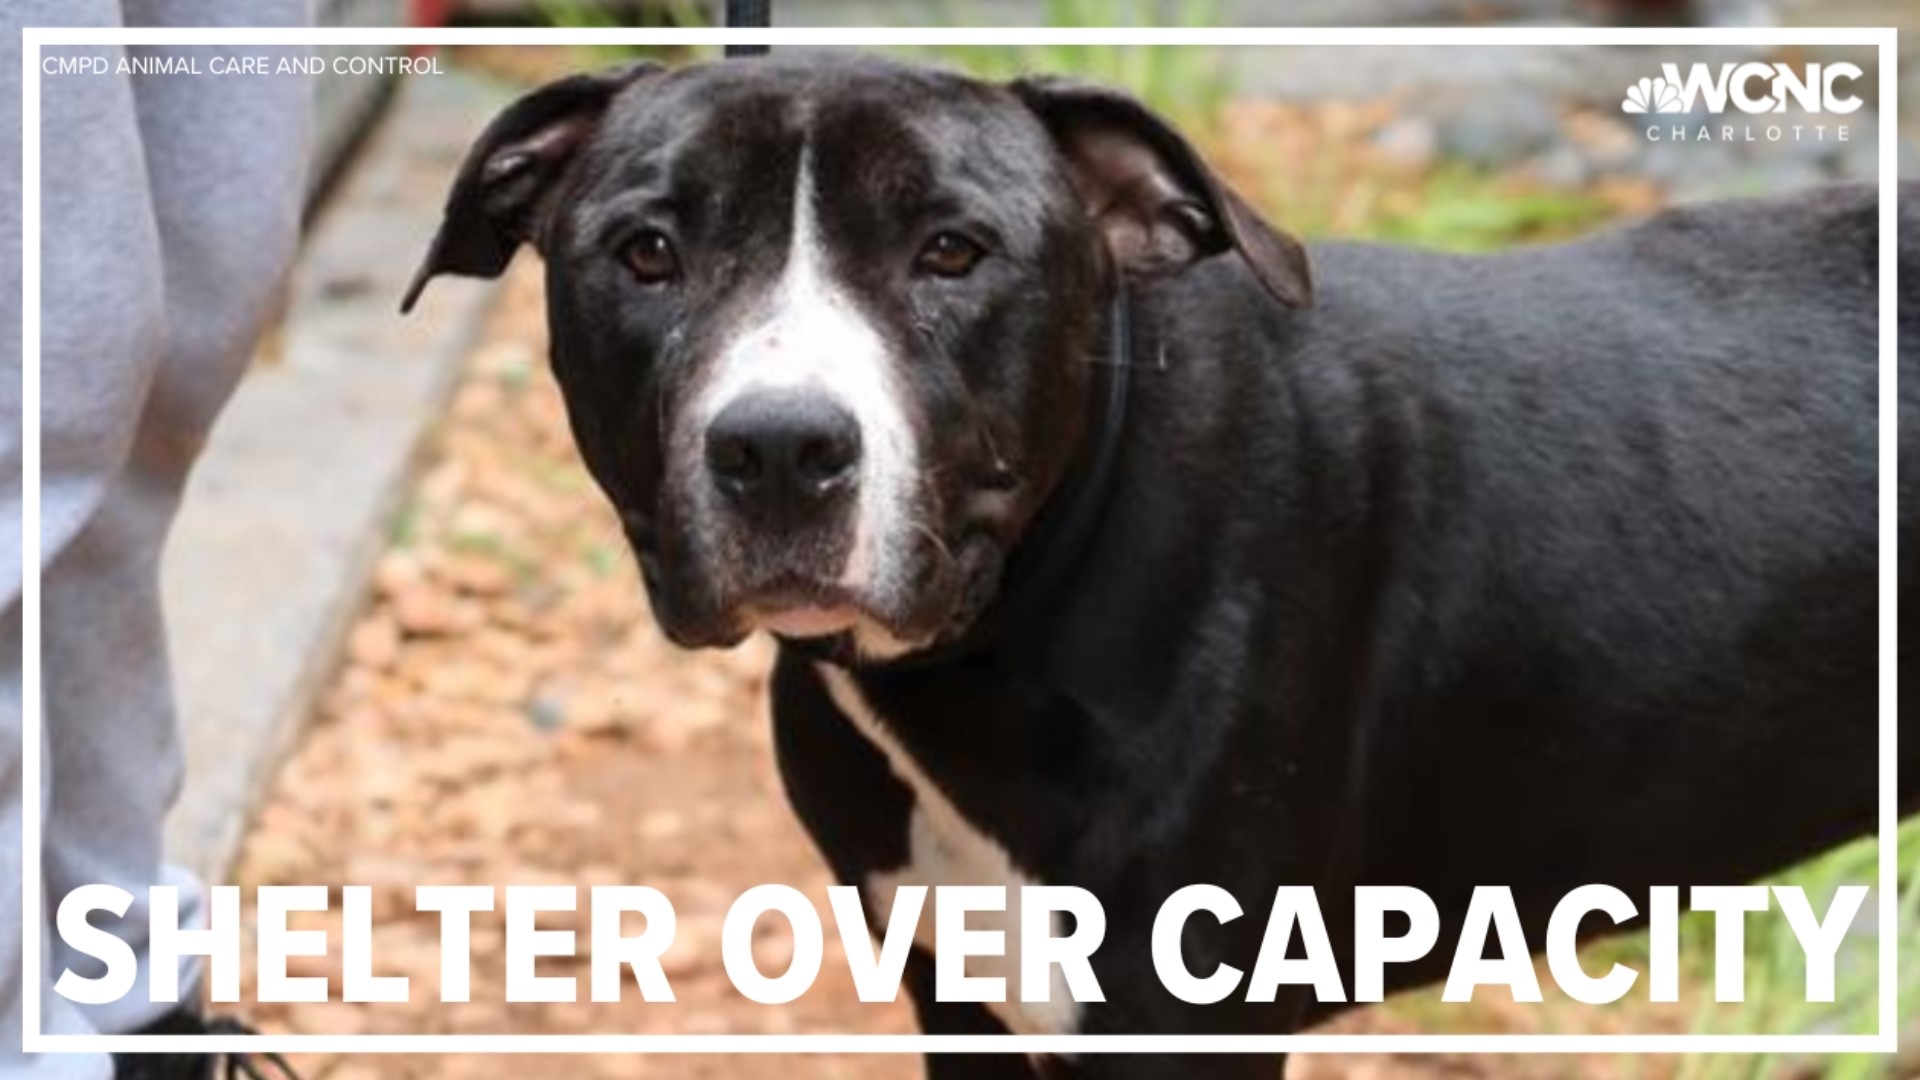 CMPD Animal Care and Control is still in need of adopters, fosters and 'staycationers.'